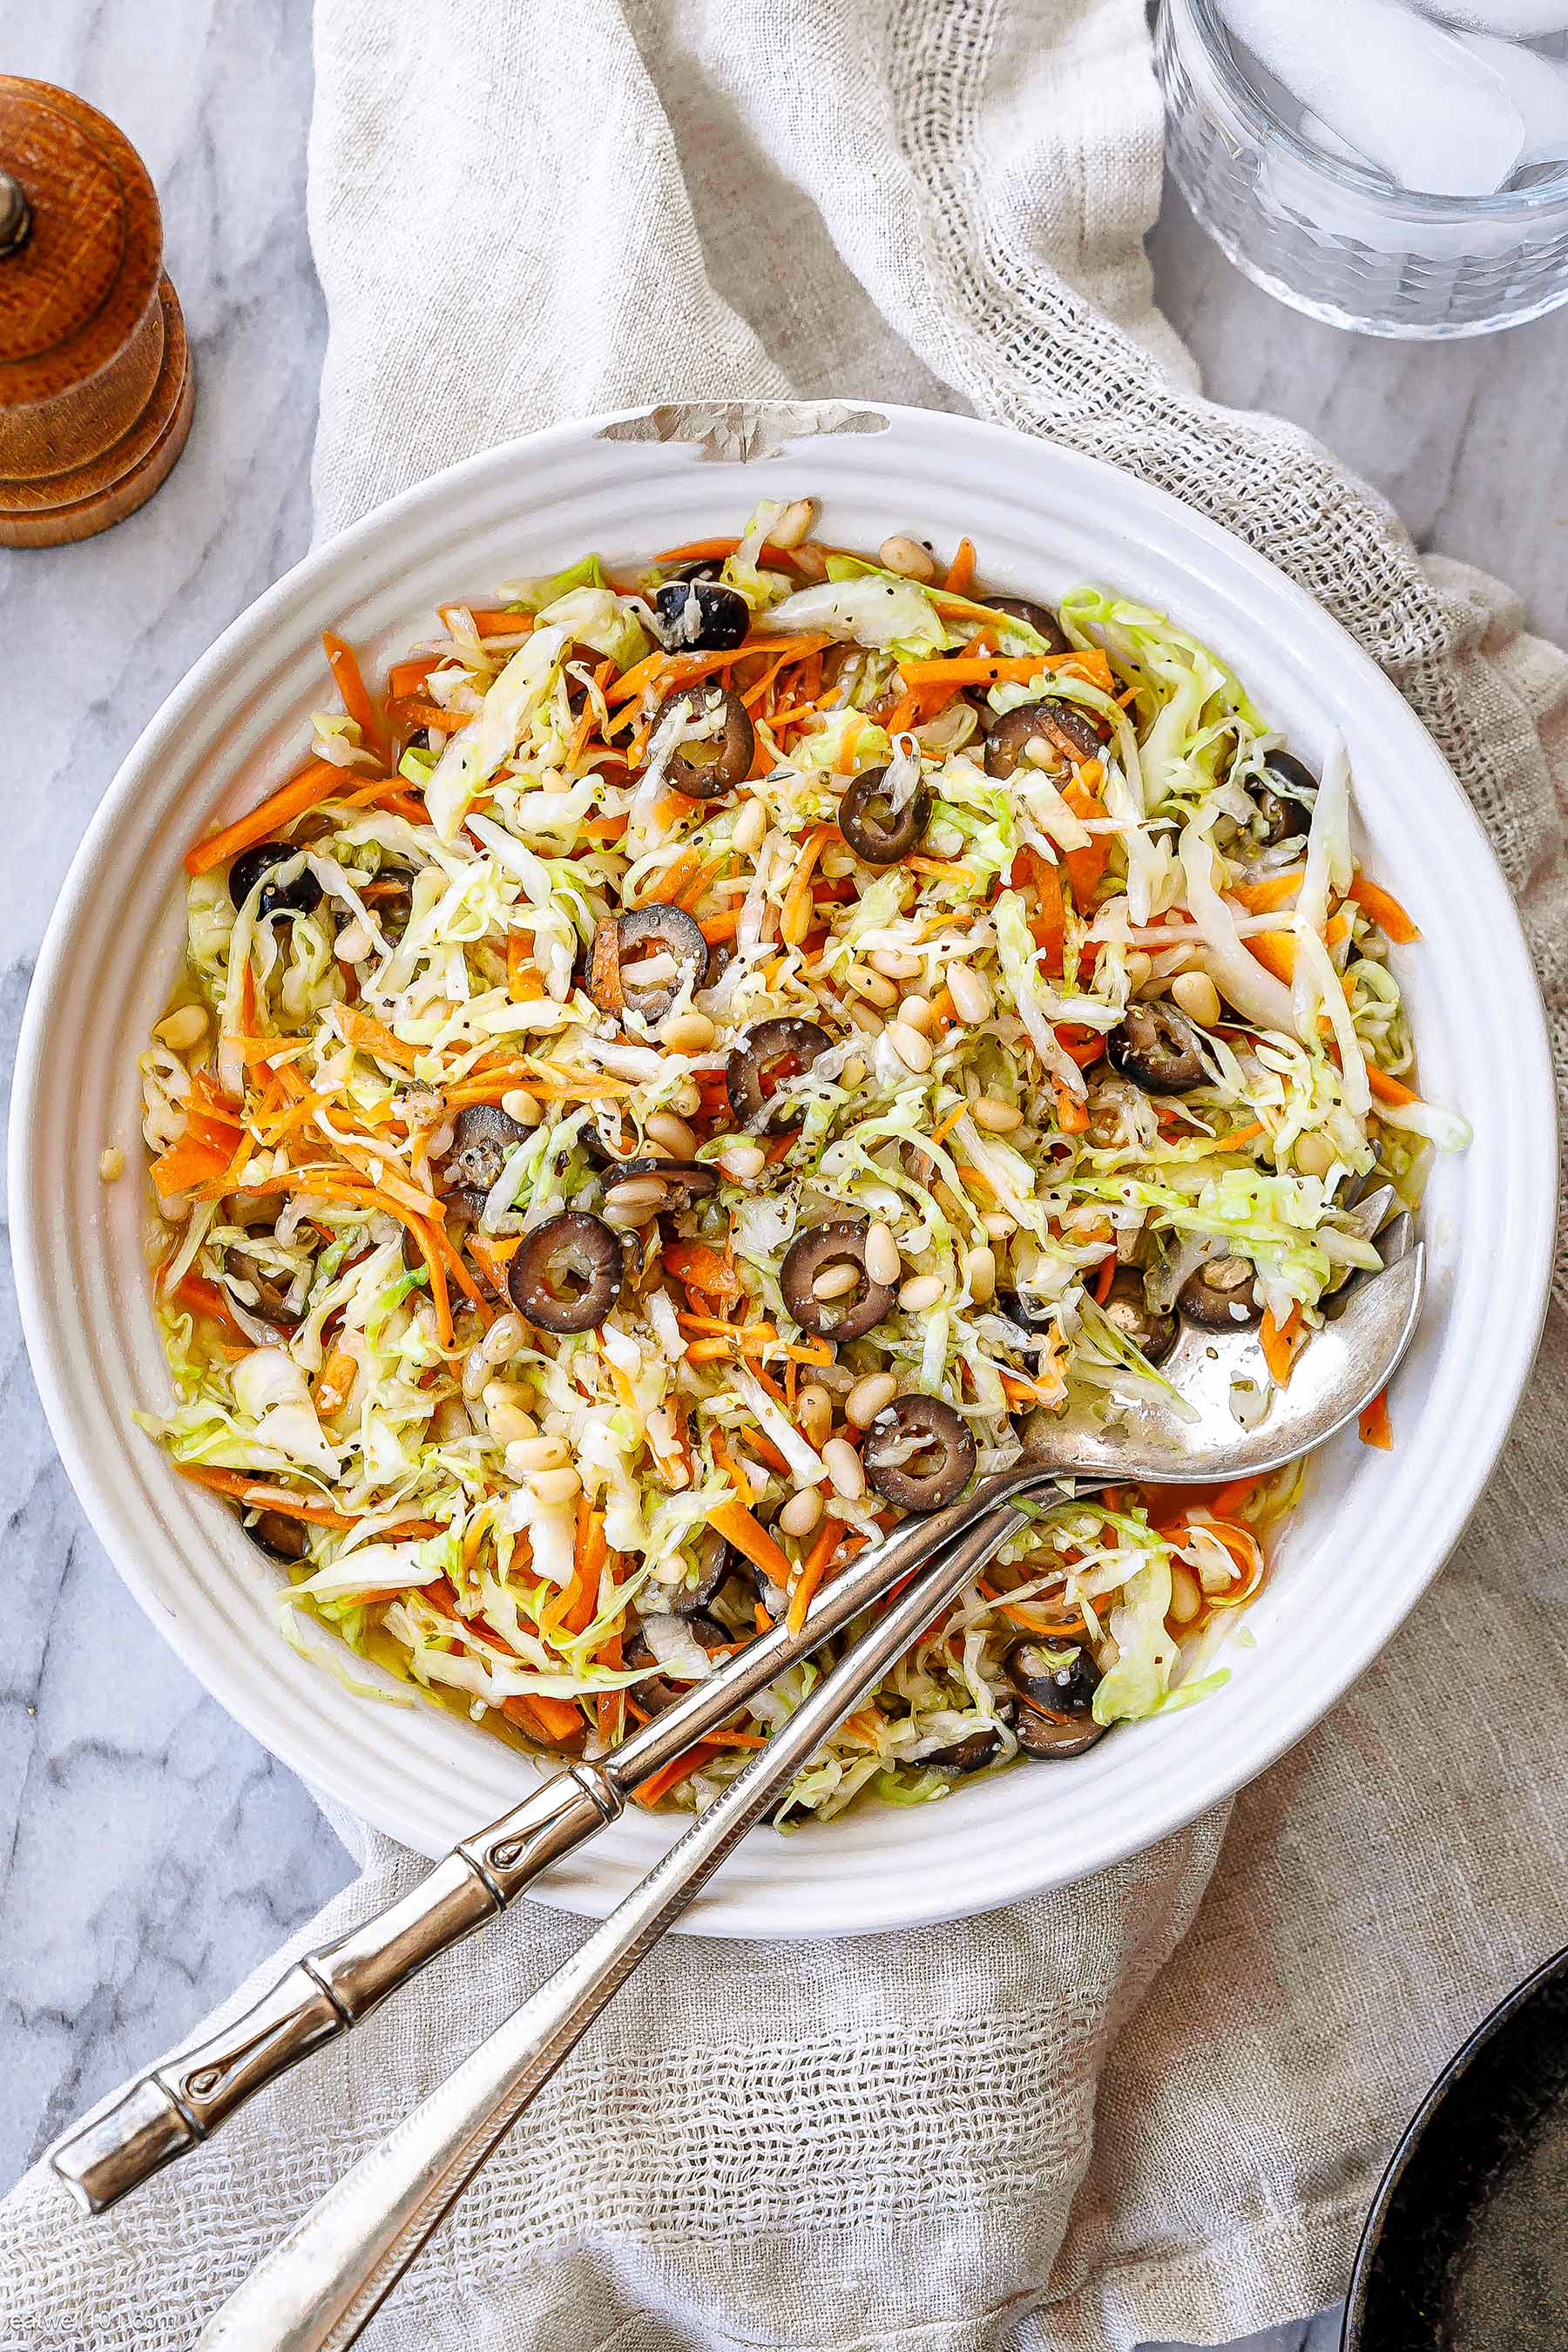 Healthy coleslaw recipe without mayonnaise